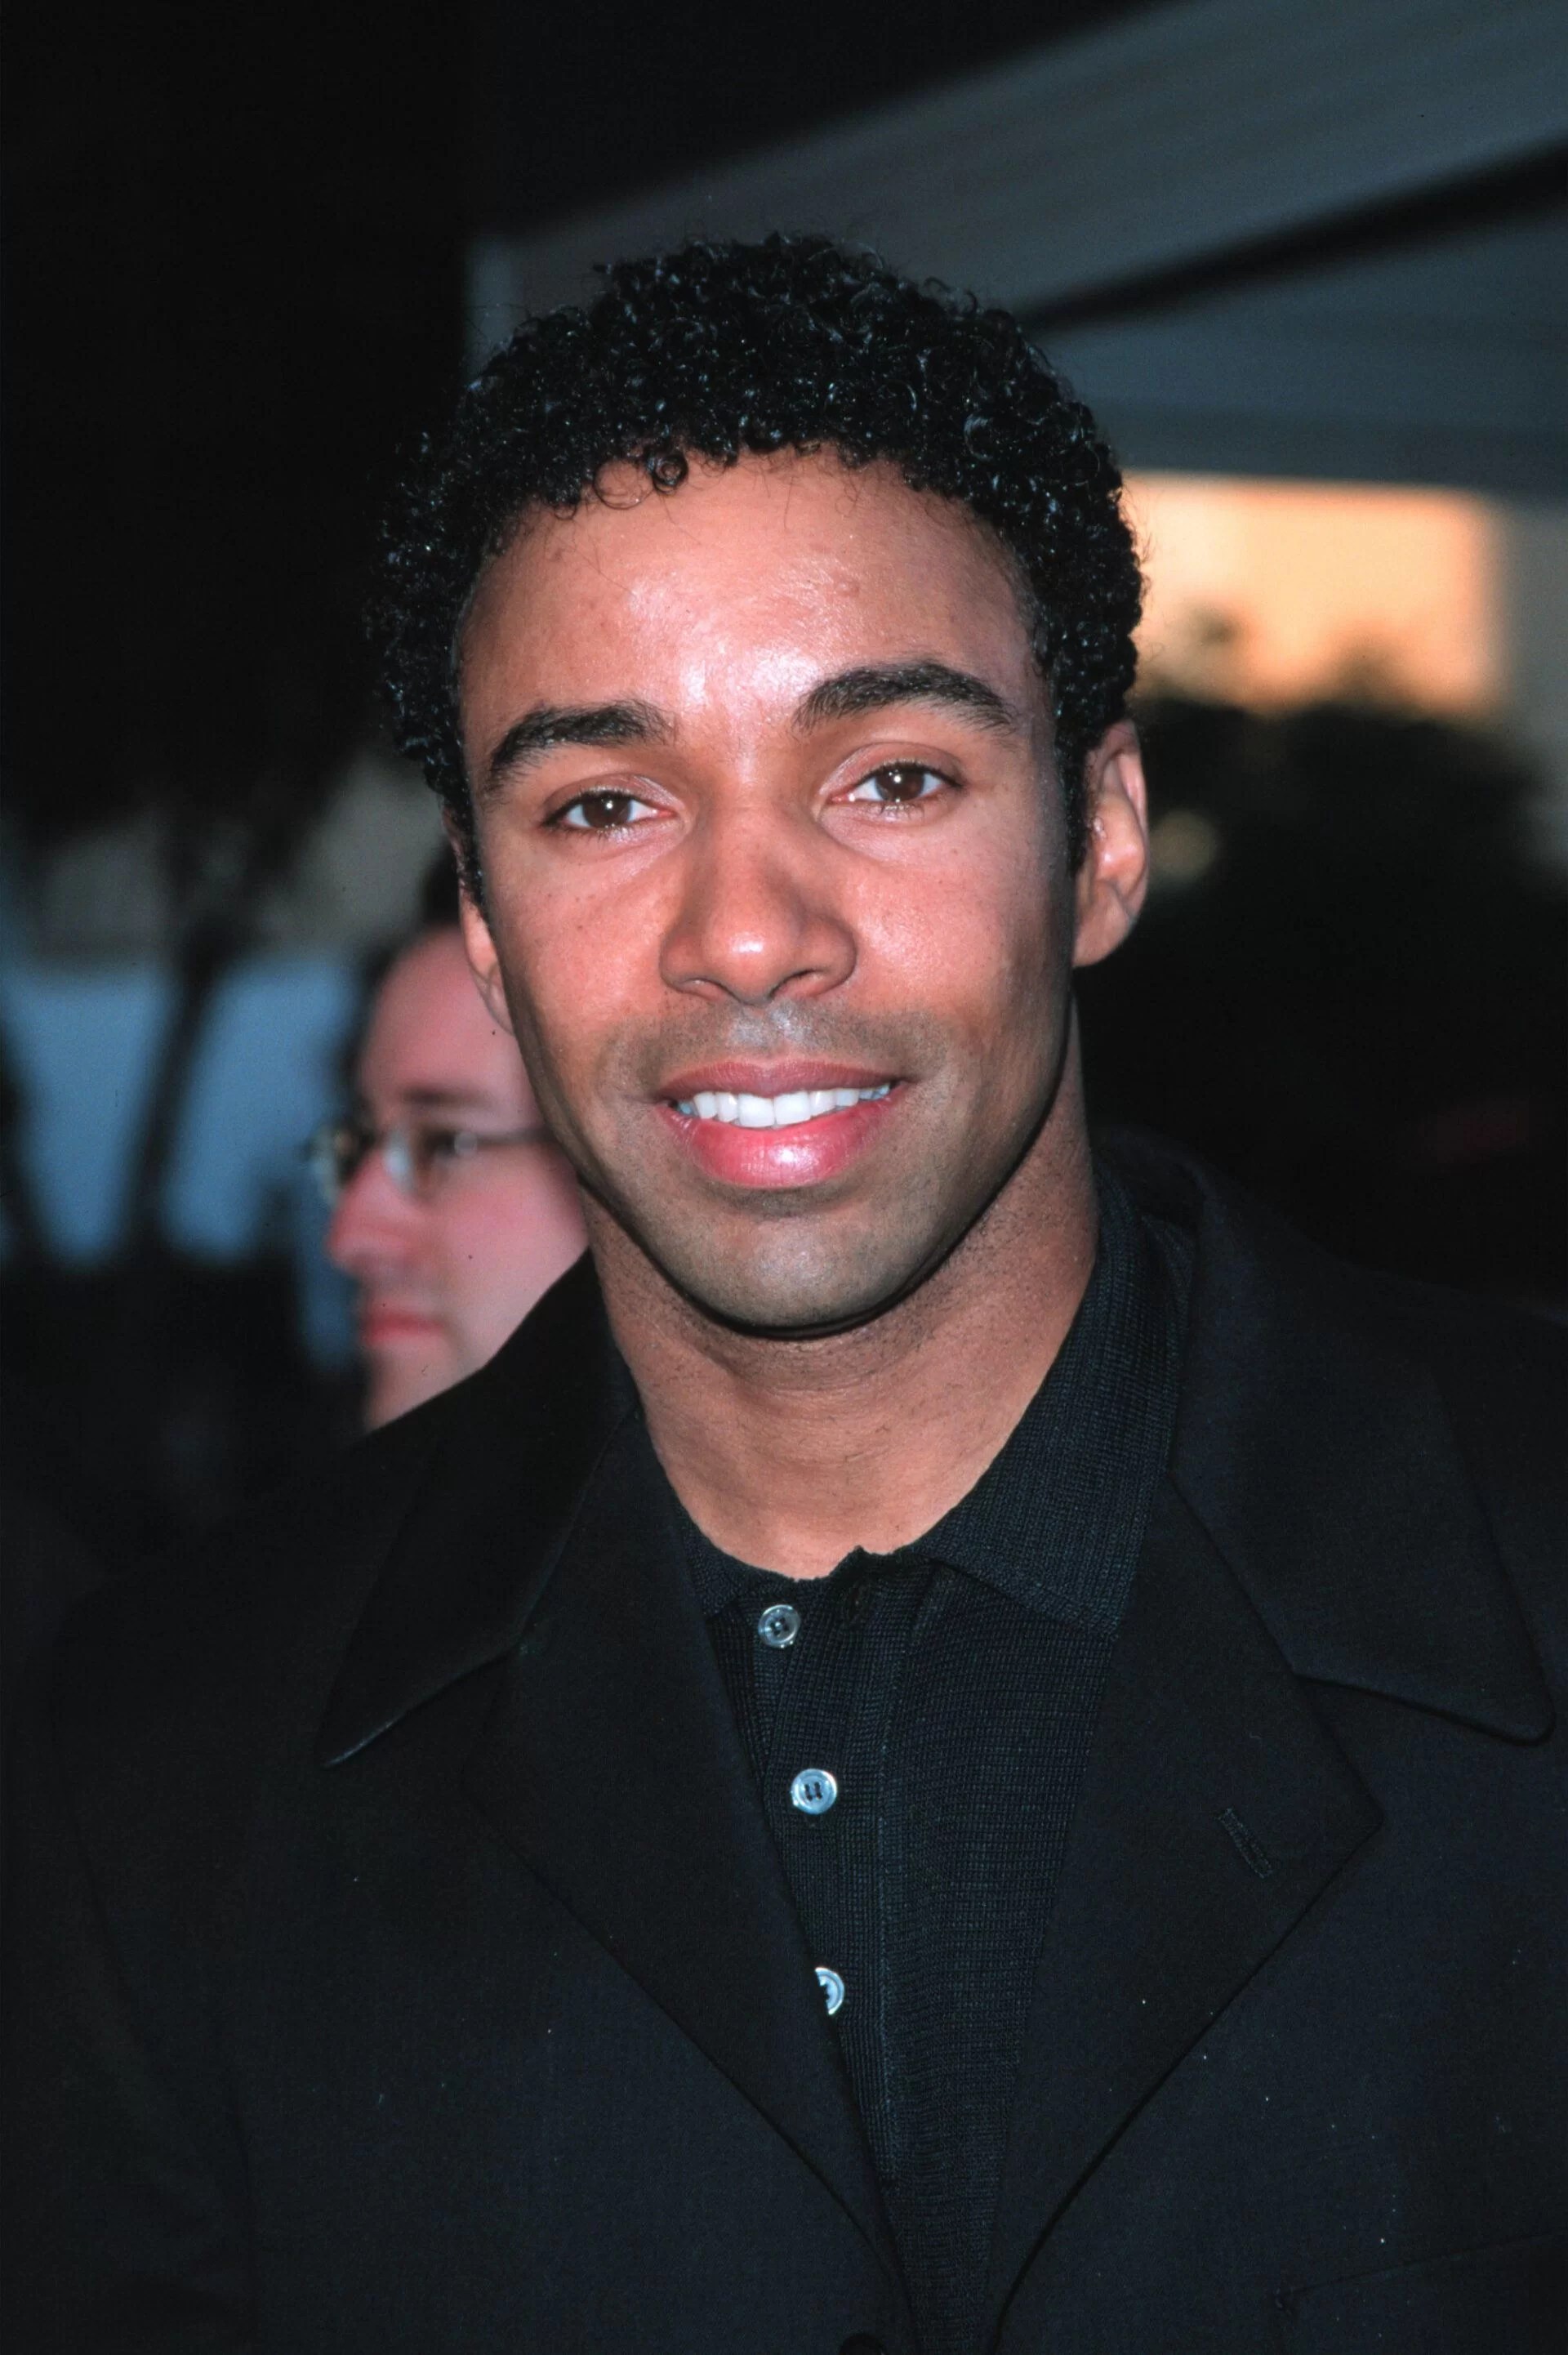 Who is Actor Allen Payne? His Wife, Parents, Age, Height & More